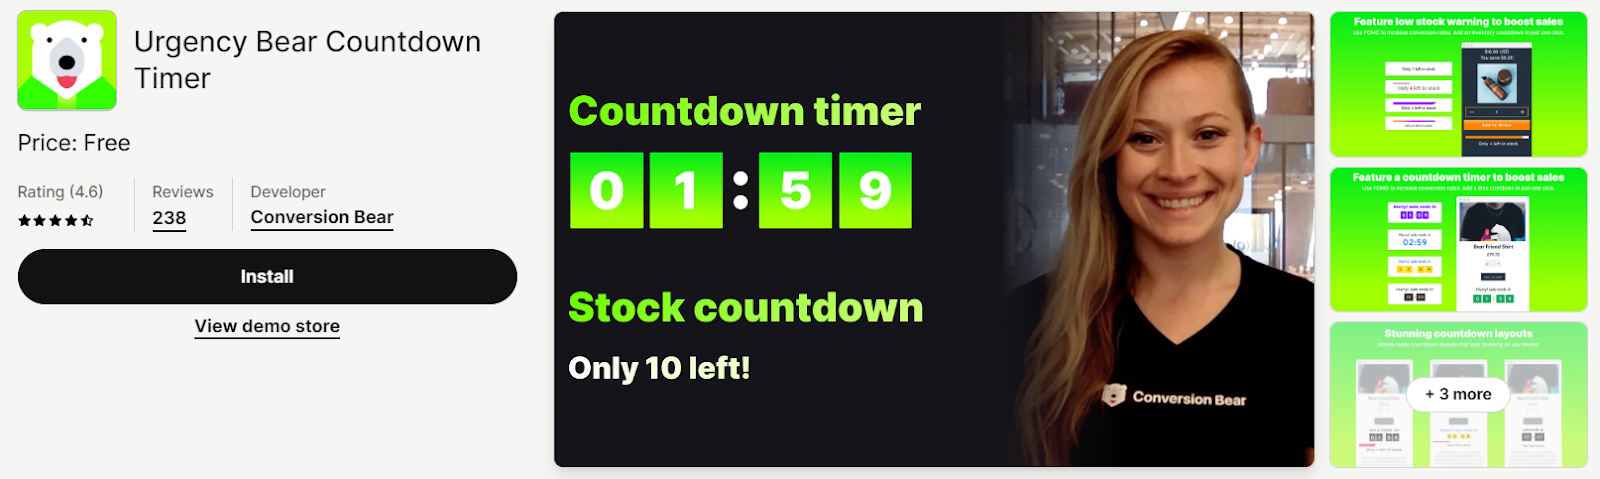 Urgency Bear Countdown Timer, good app for Shopify sellers.